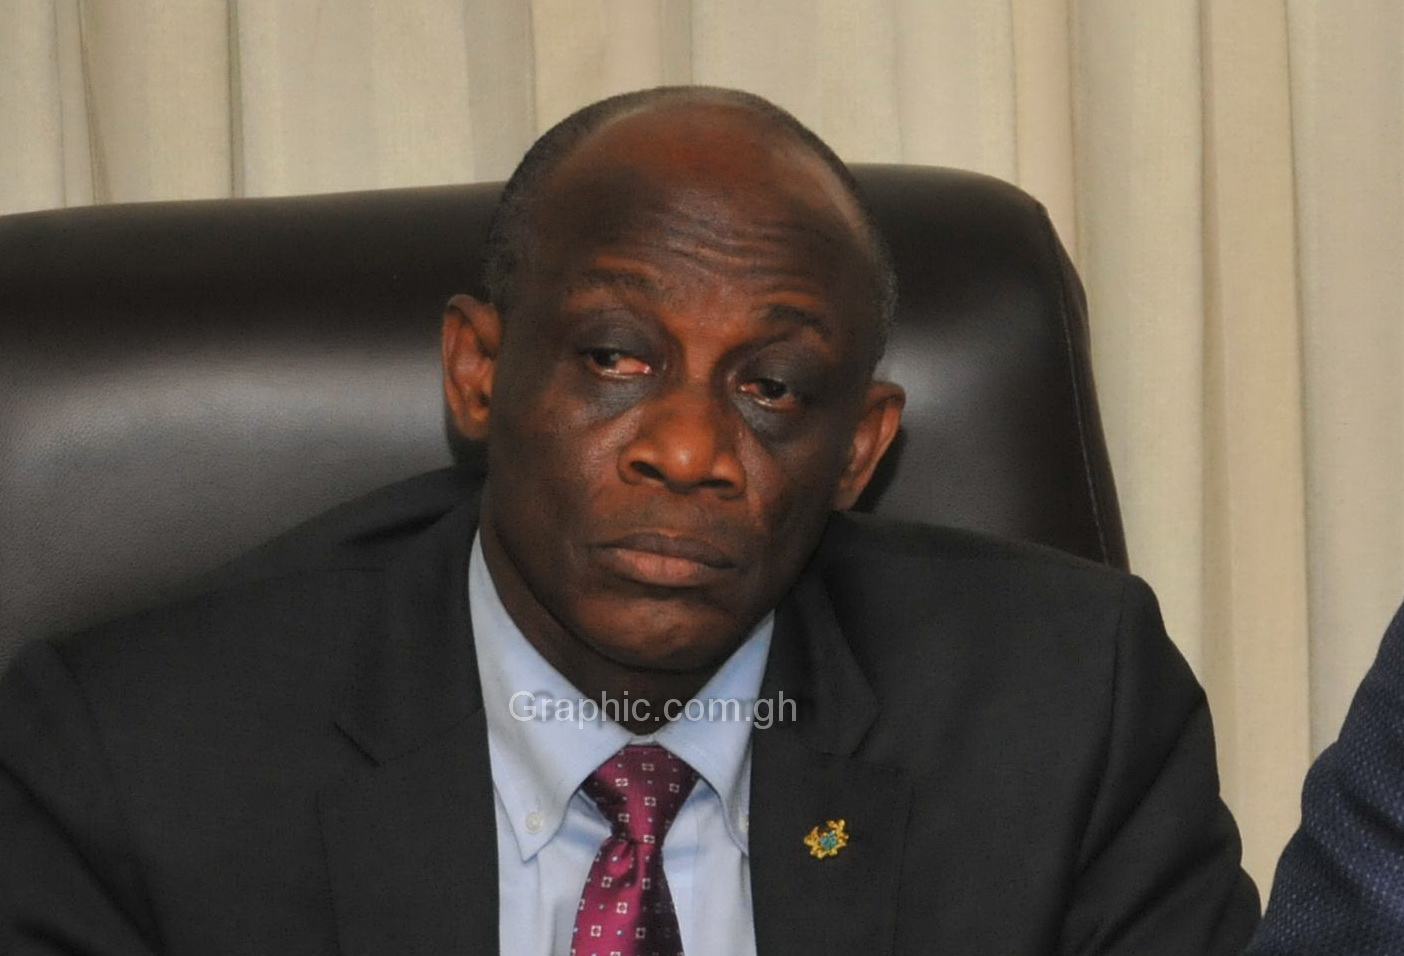 Terkper on why we should protect the VAT base